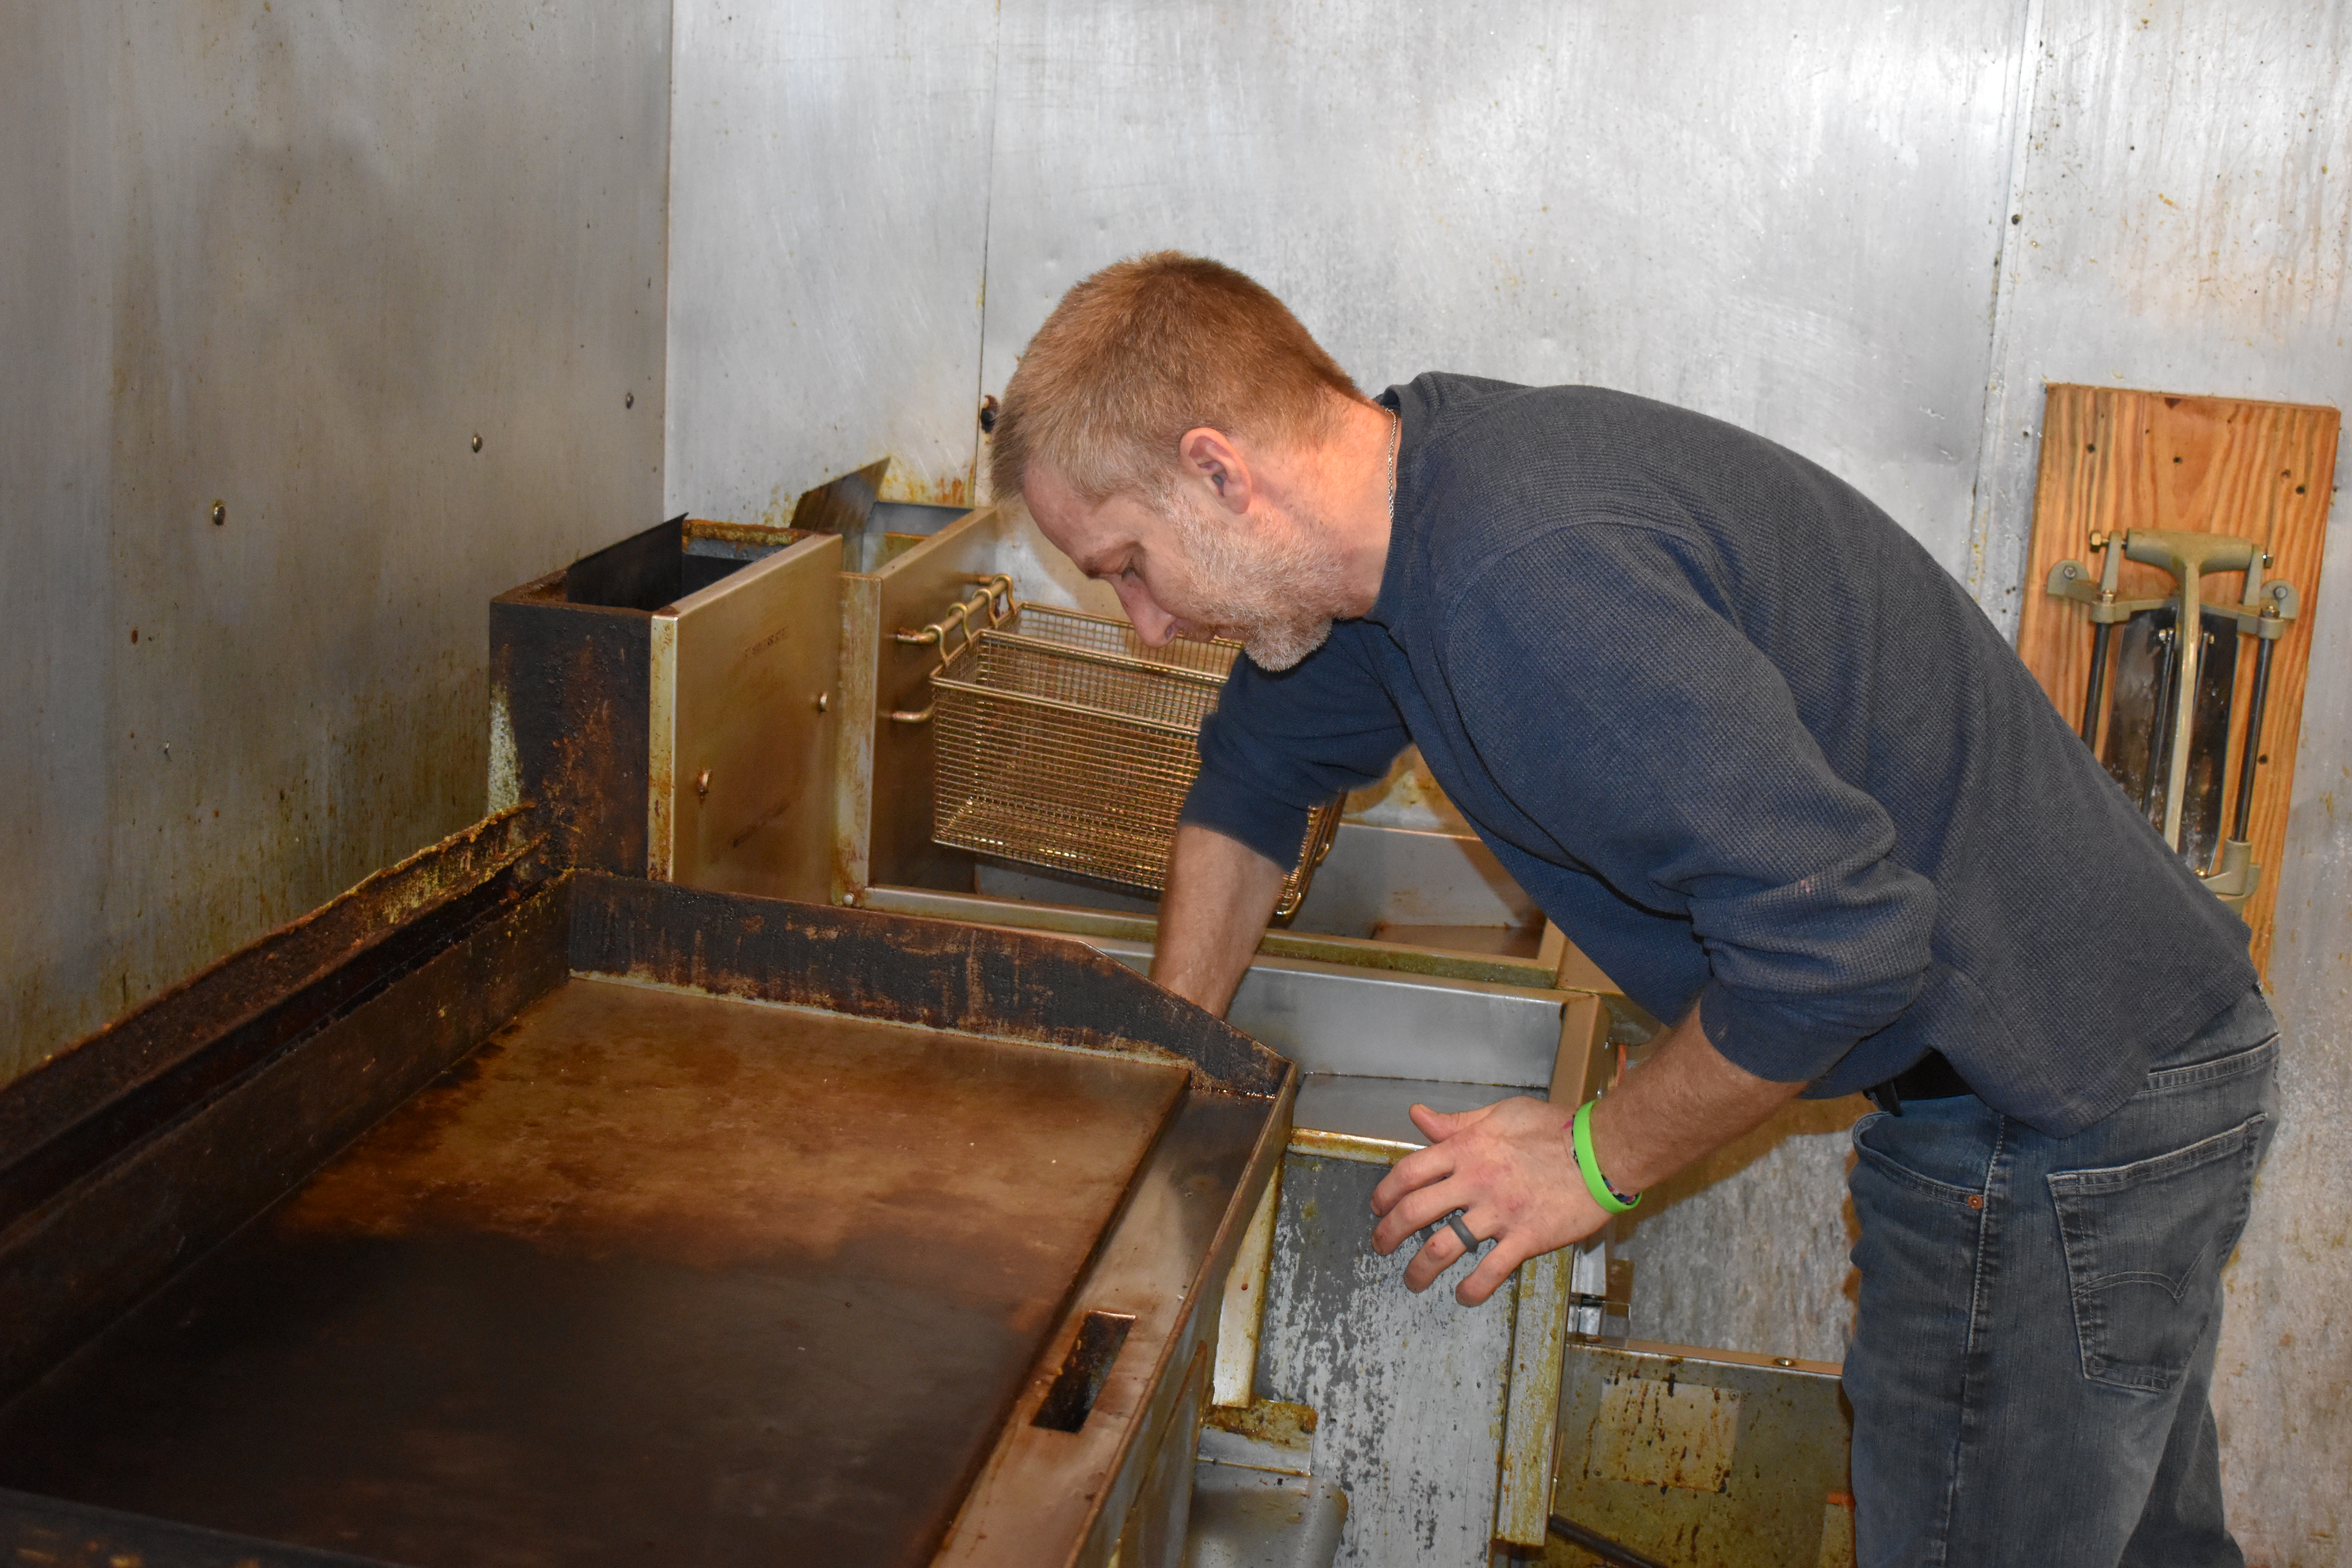 Dave Driscoll scrubs the fryer at R.P. McMurphy's Sports Bar and Grill, Masury.